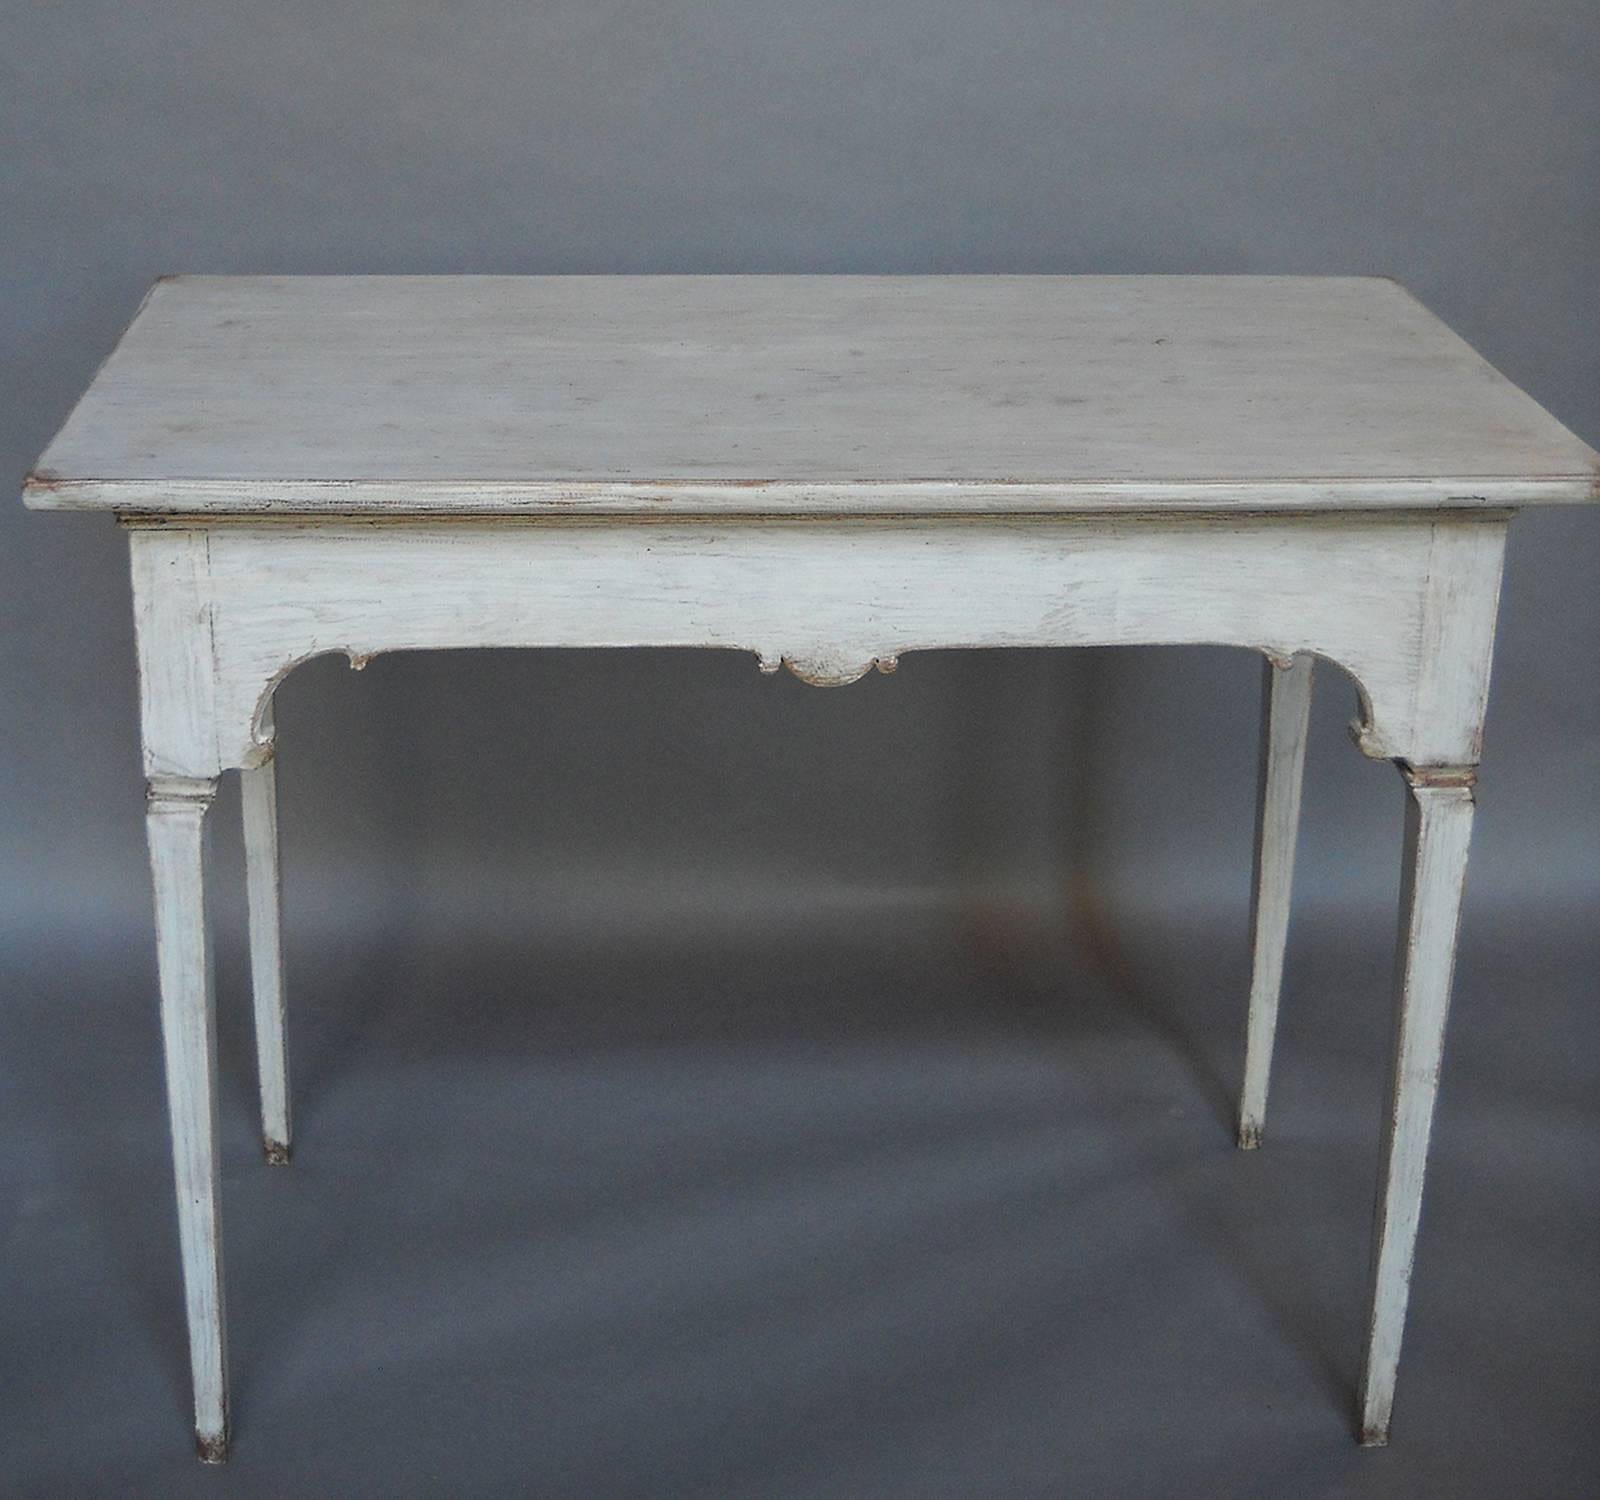 Gustavian period Rococo tea table, Sweden, circa 1790, with candle slides on either side. Shaped apron with square tapering legs. The top lifts away, leaving a tray table for serving.